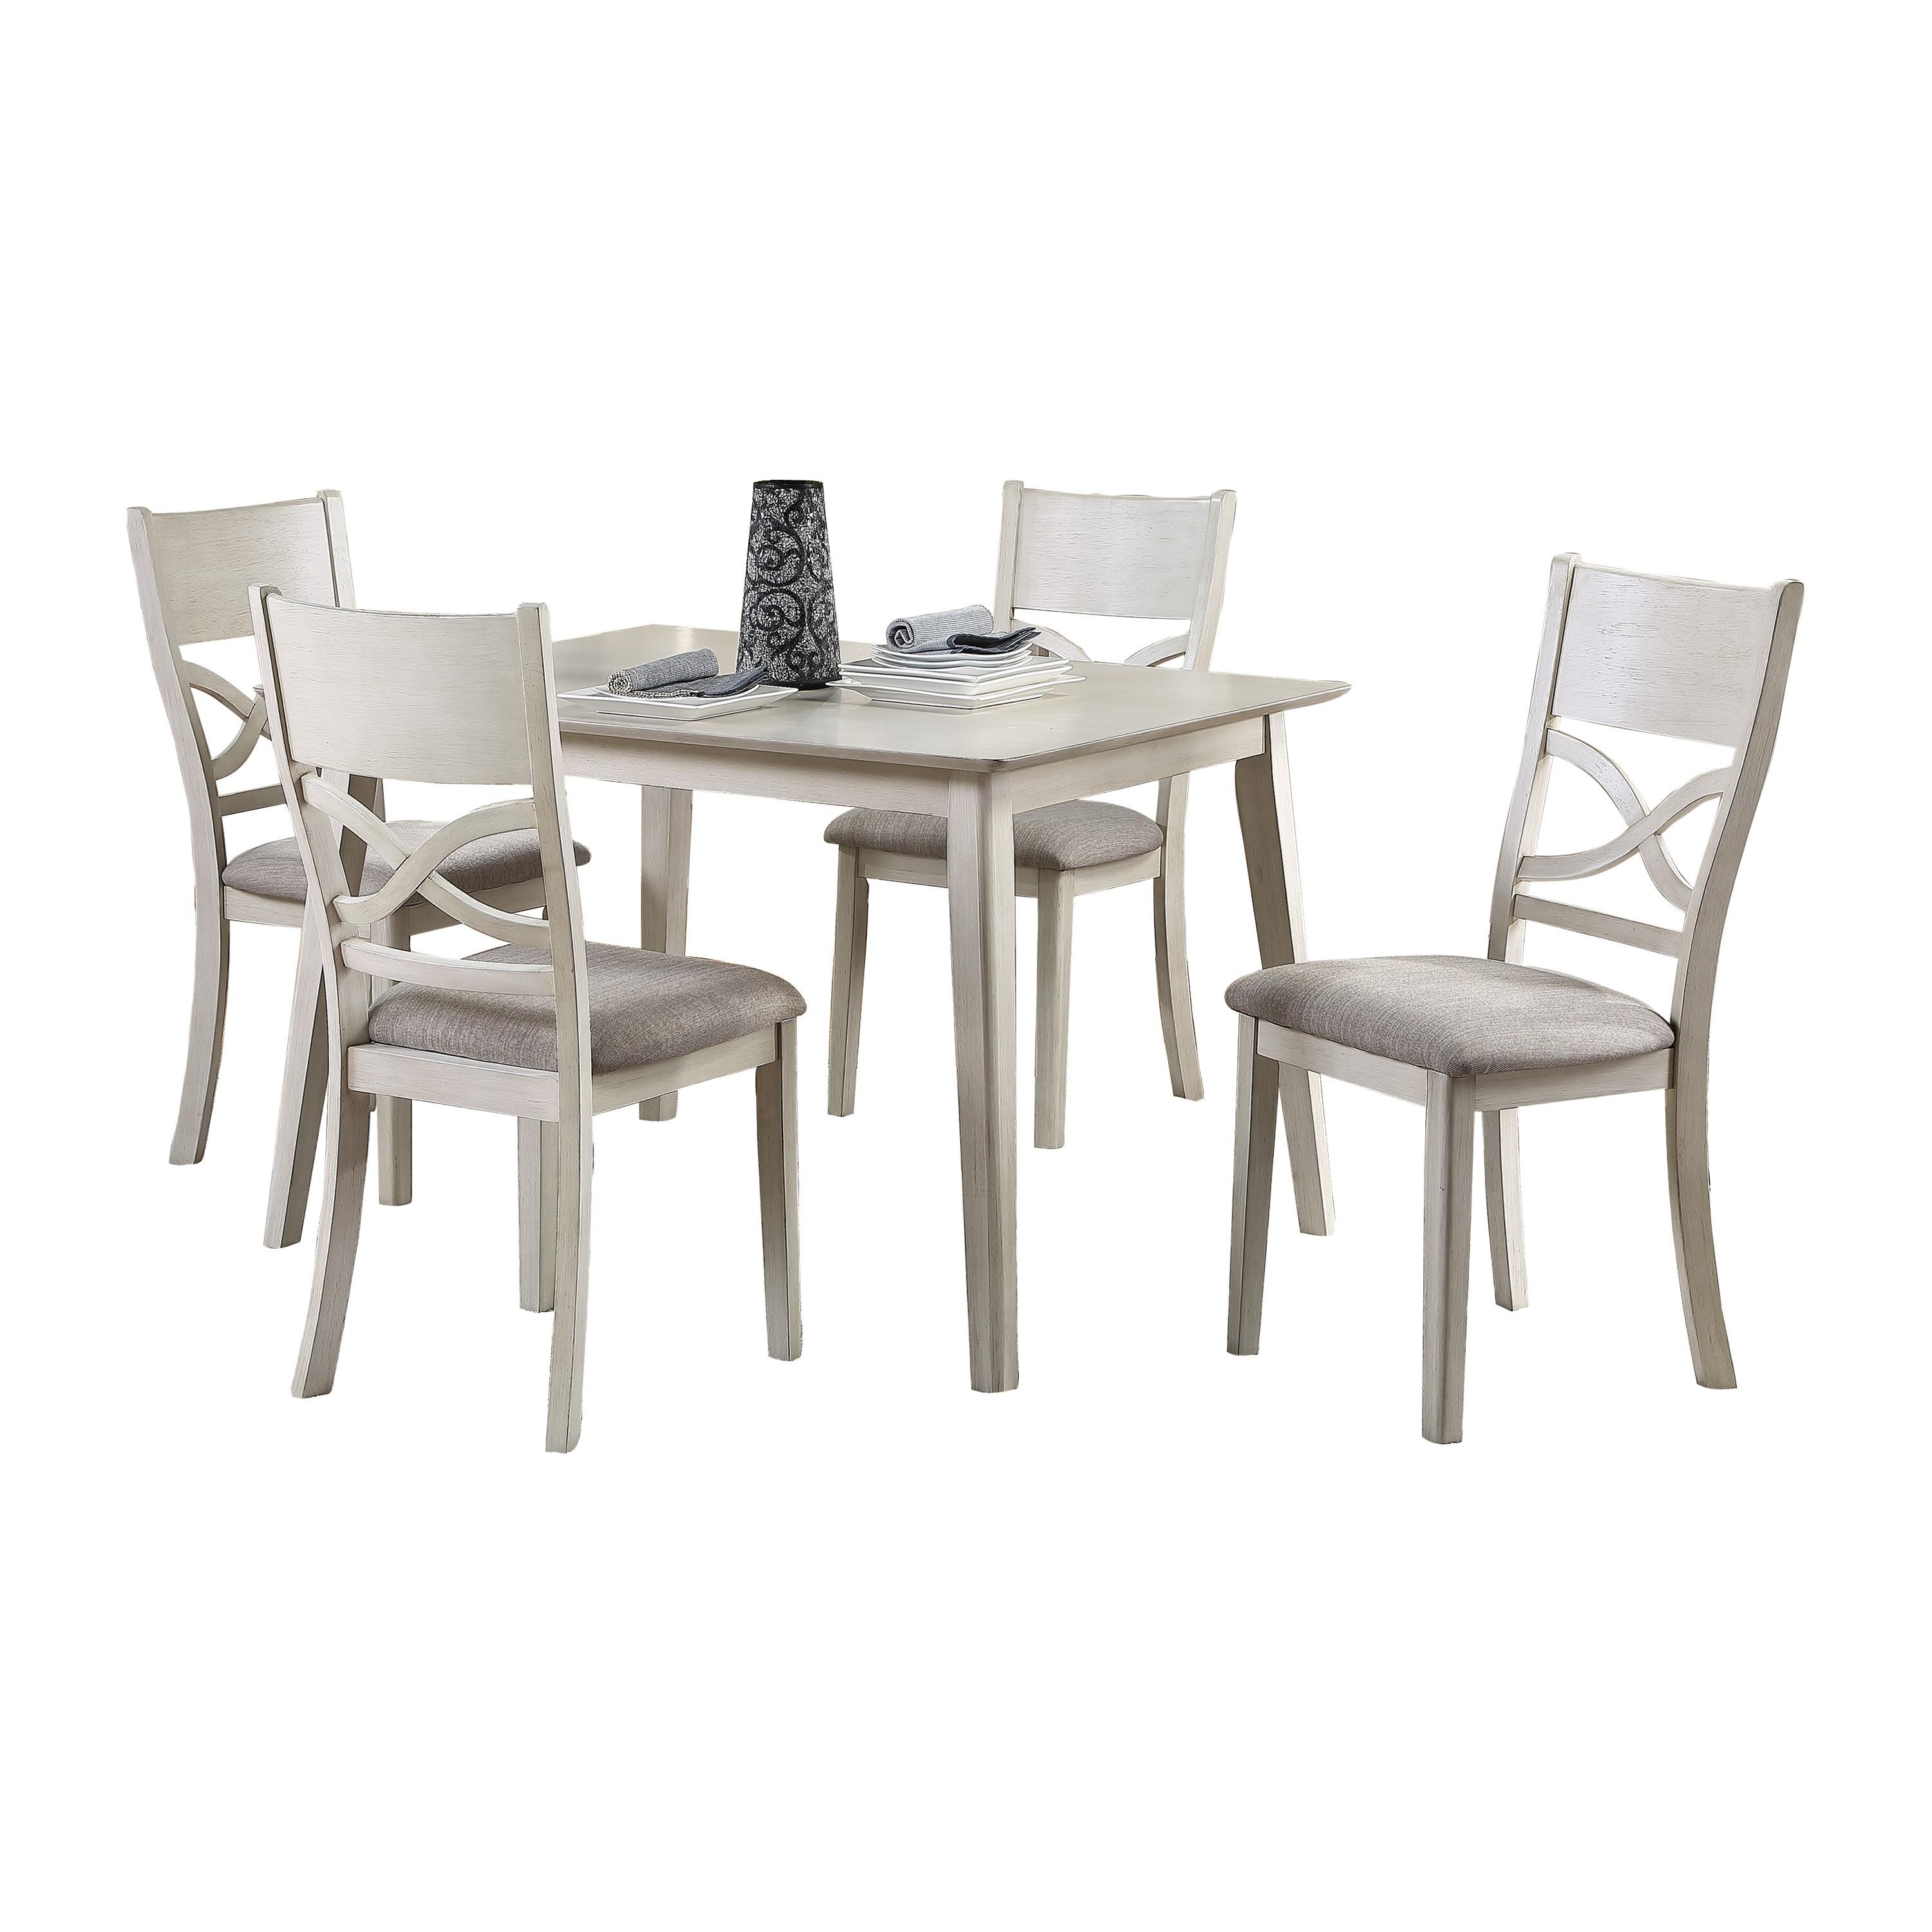 Transitional Dining Room Set 5739 Anderson 5739 in Antique White Polyester